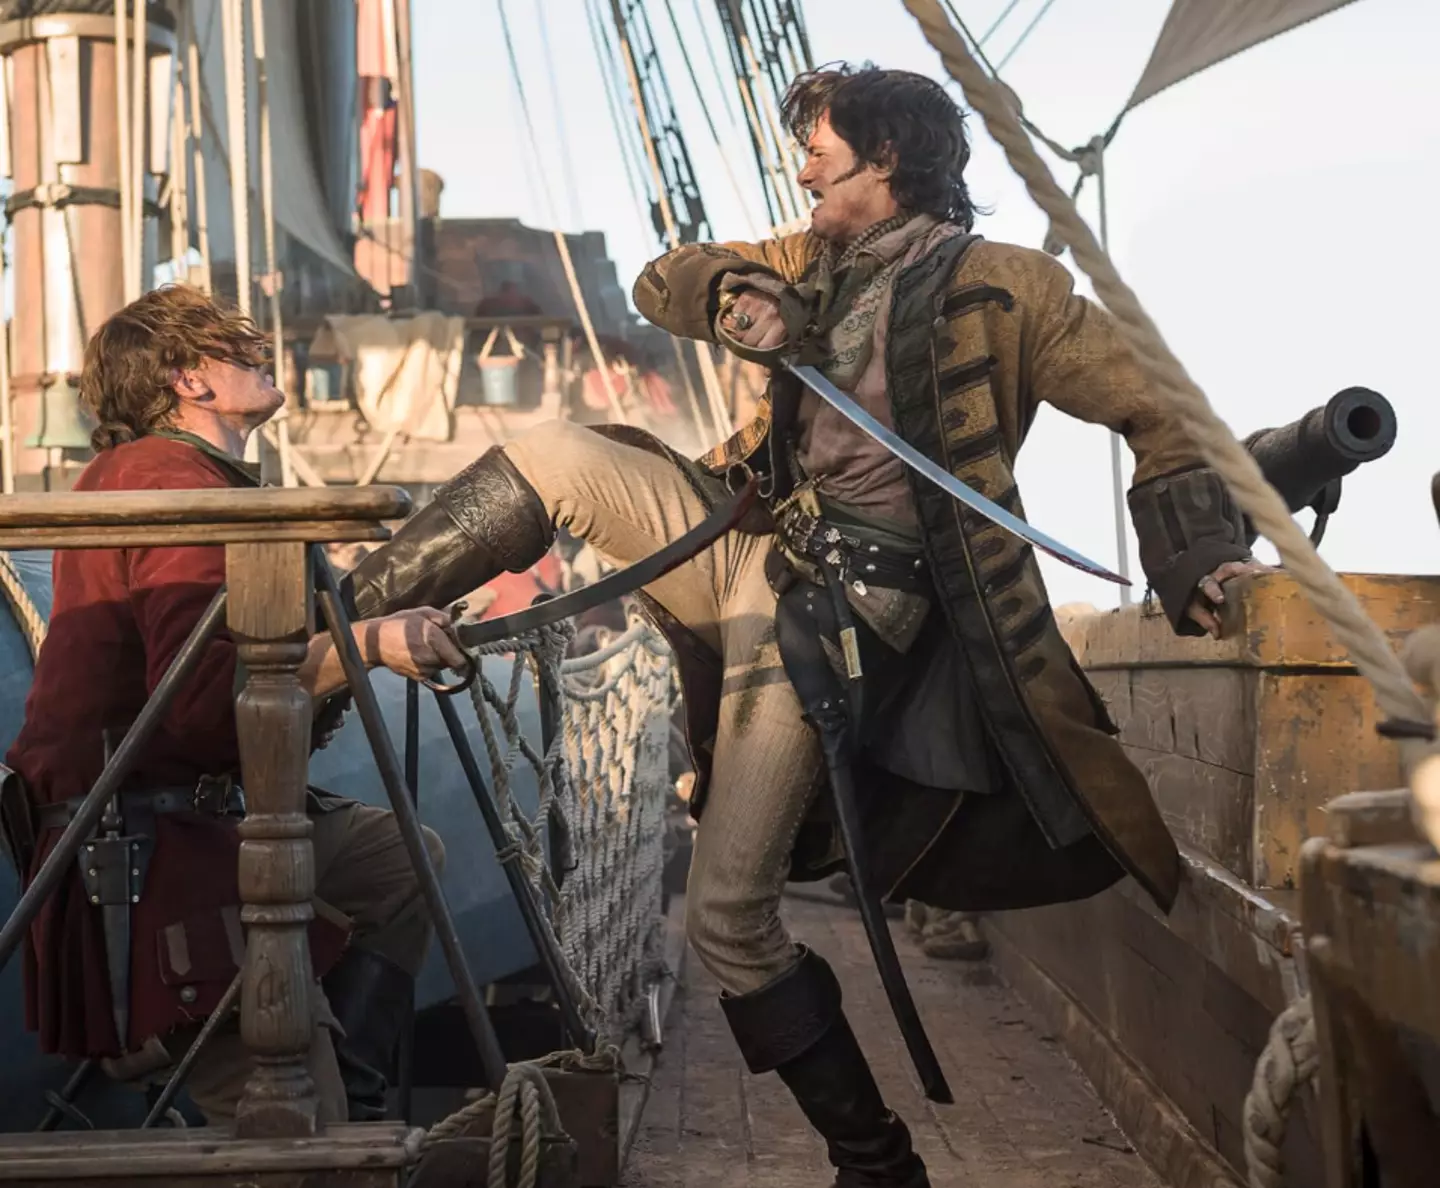 Black Sails is loved by viewers (David Bloomer/Starz Entertainment, LLC)